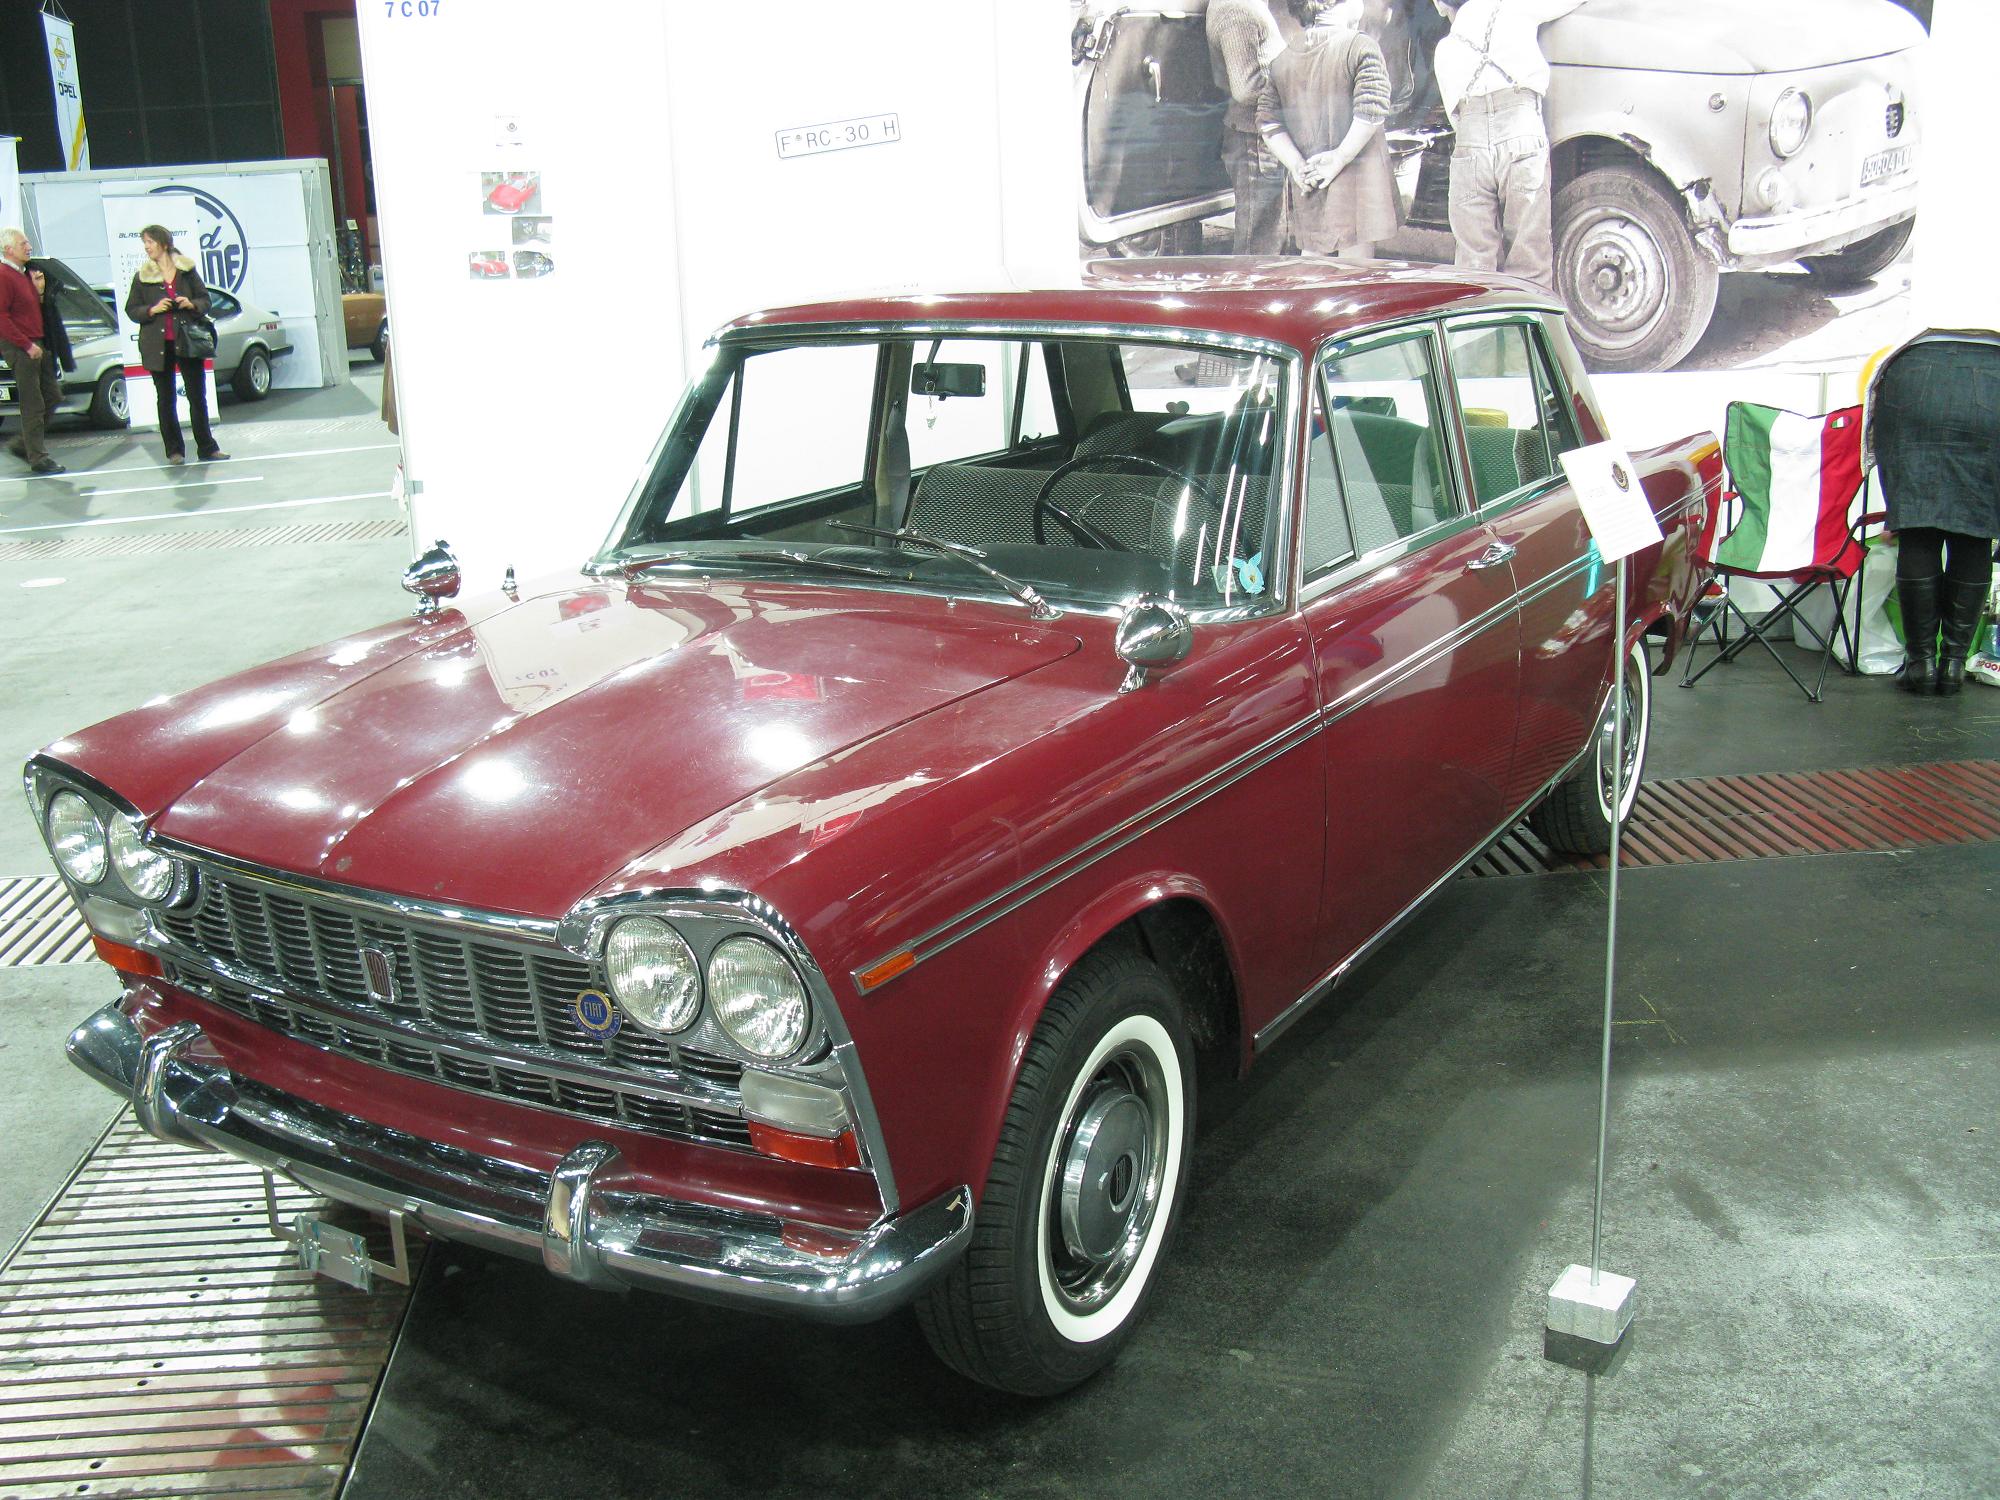 an old red station wagon is on display at a car show